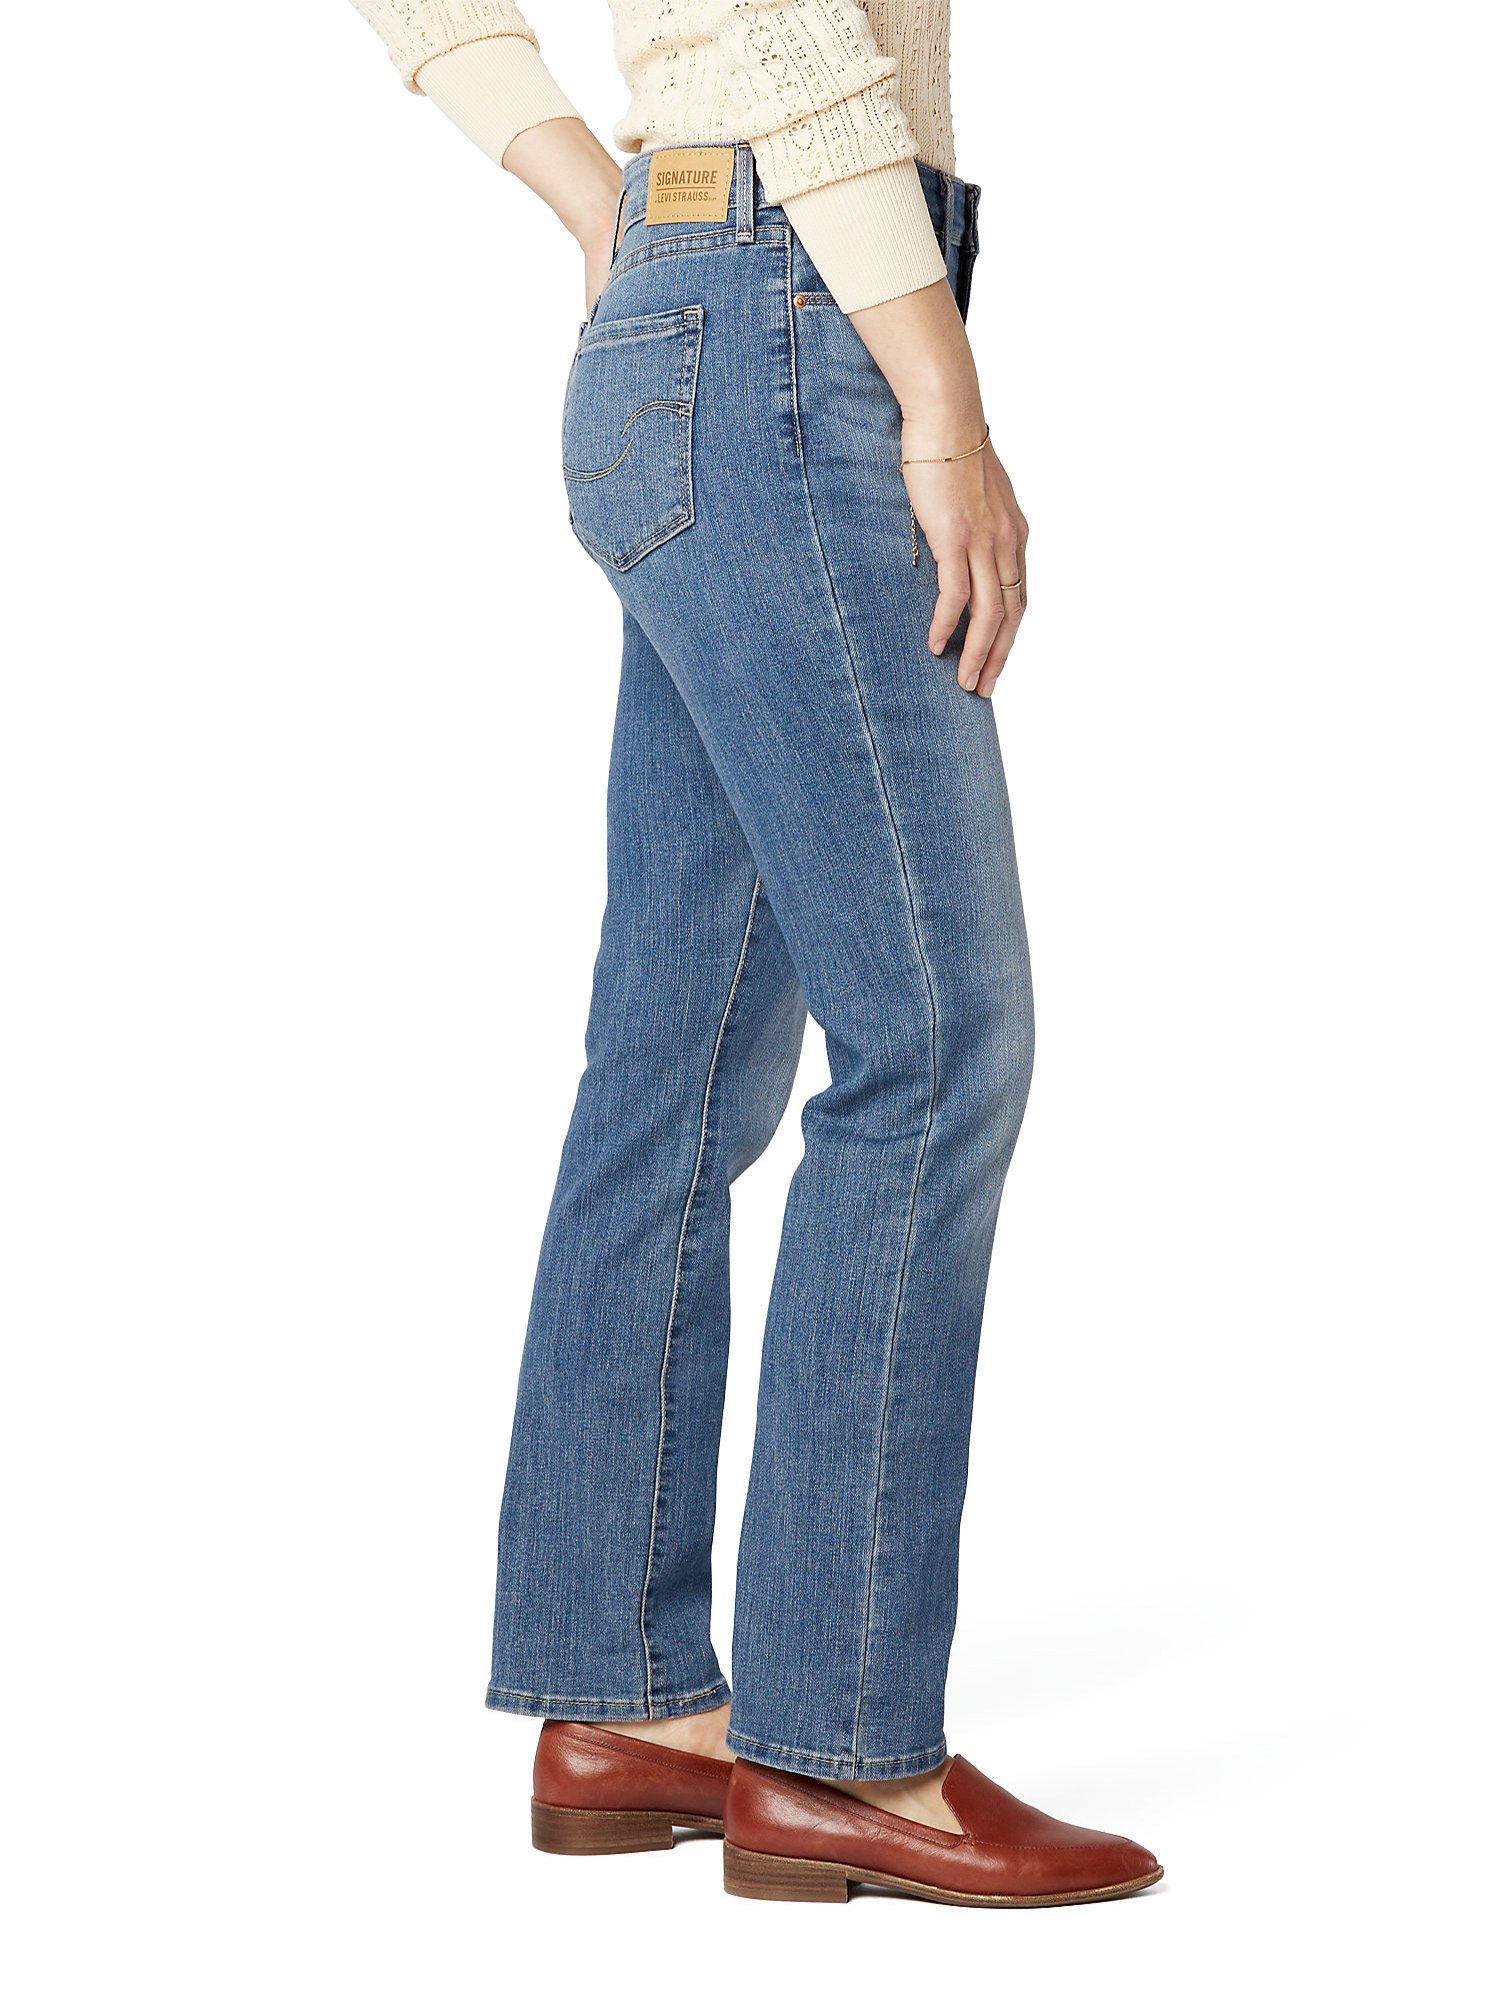 Signature by Levi Strauss & Co. Women's and Women's Plus Size Mid Rise Modern Straight Jeans, Sizes 2-28 - image 3 of 5